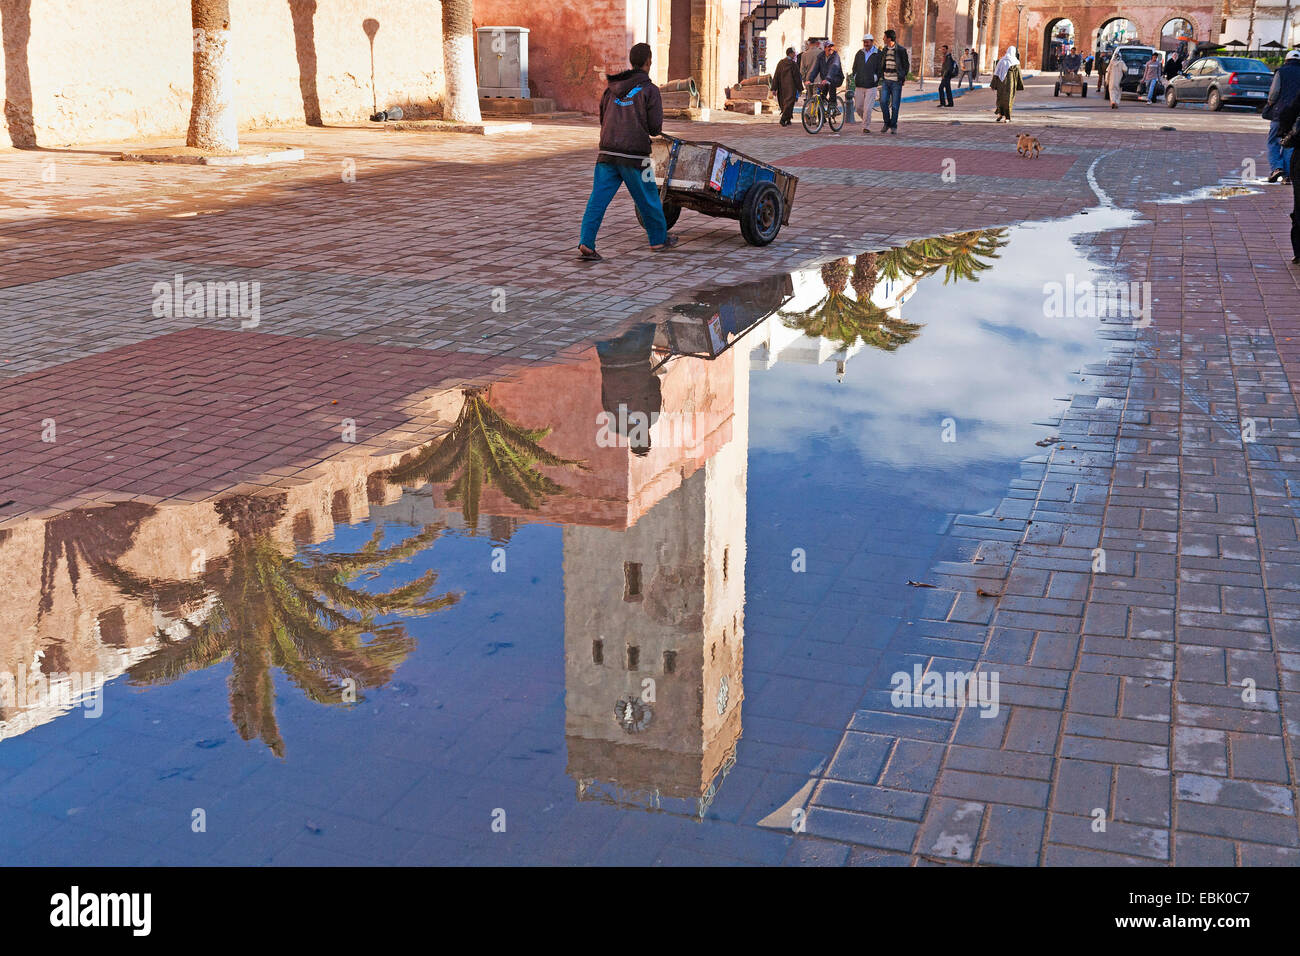 man with a barrow at the historical town wall reflecting in puddle of water after a rain shower, Morocco, Essaouira Stock Photo